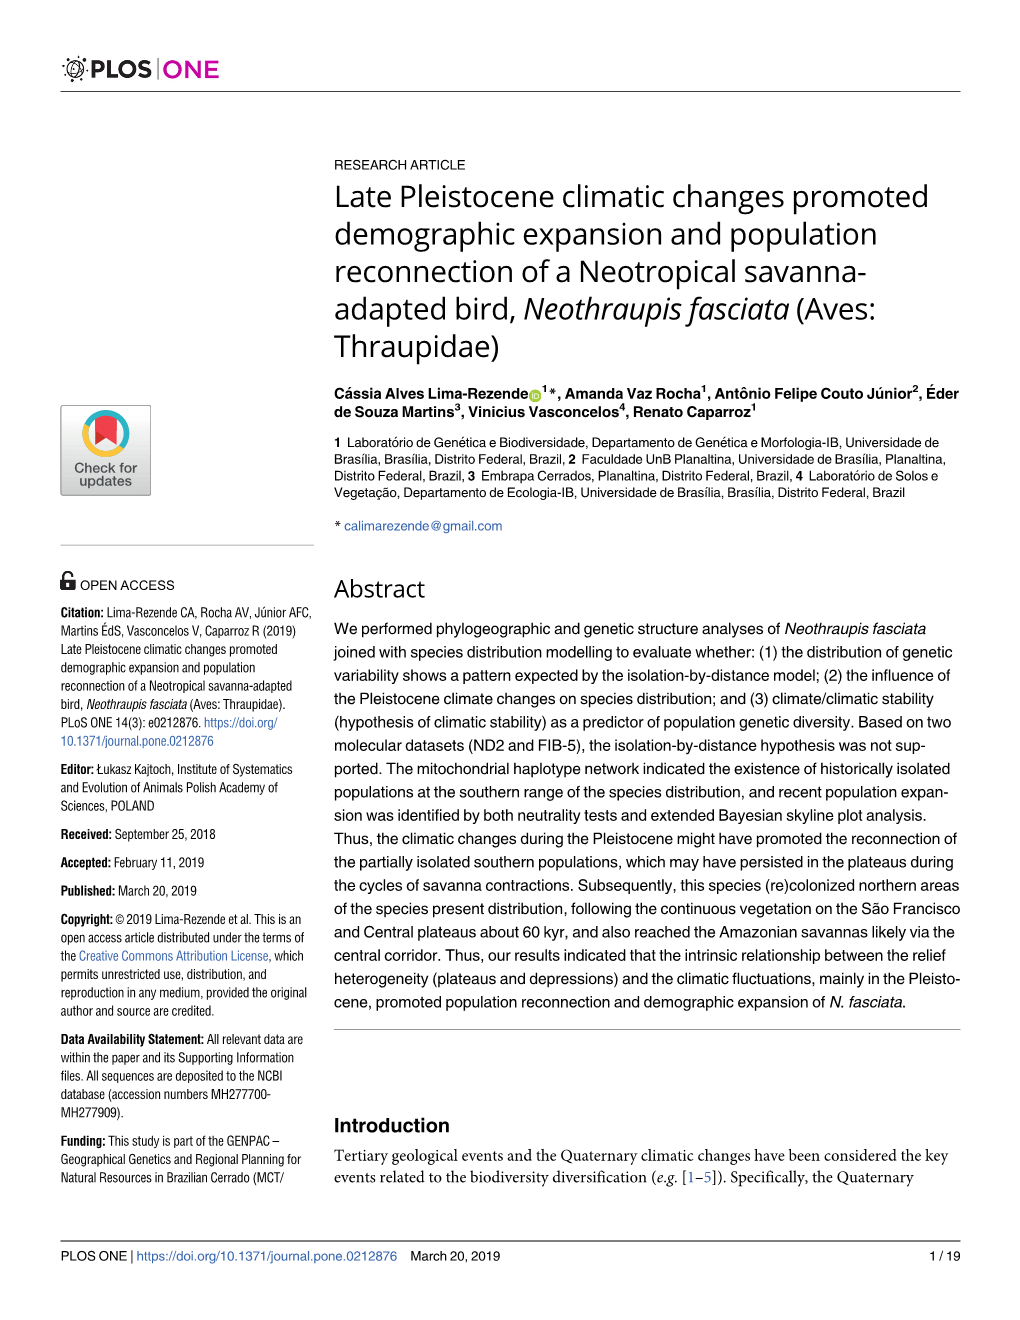 Late Pleistocene Climatic Changes Promoted Demographic Expansion